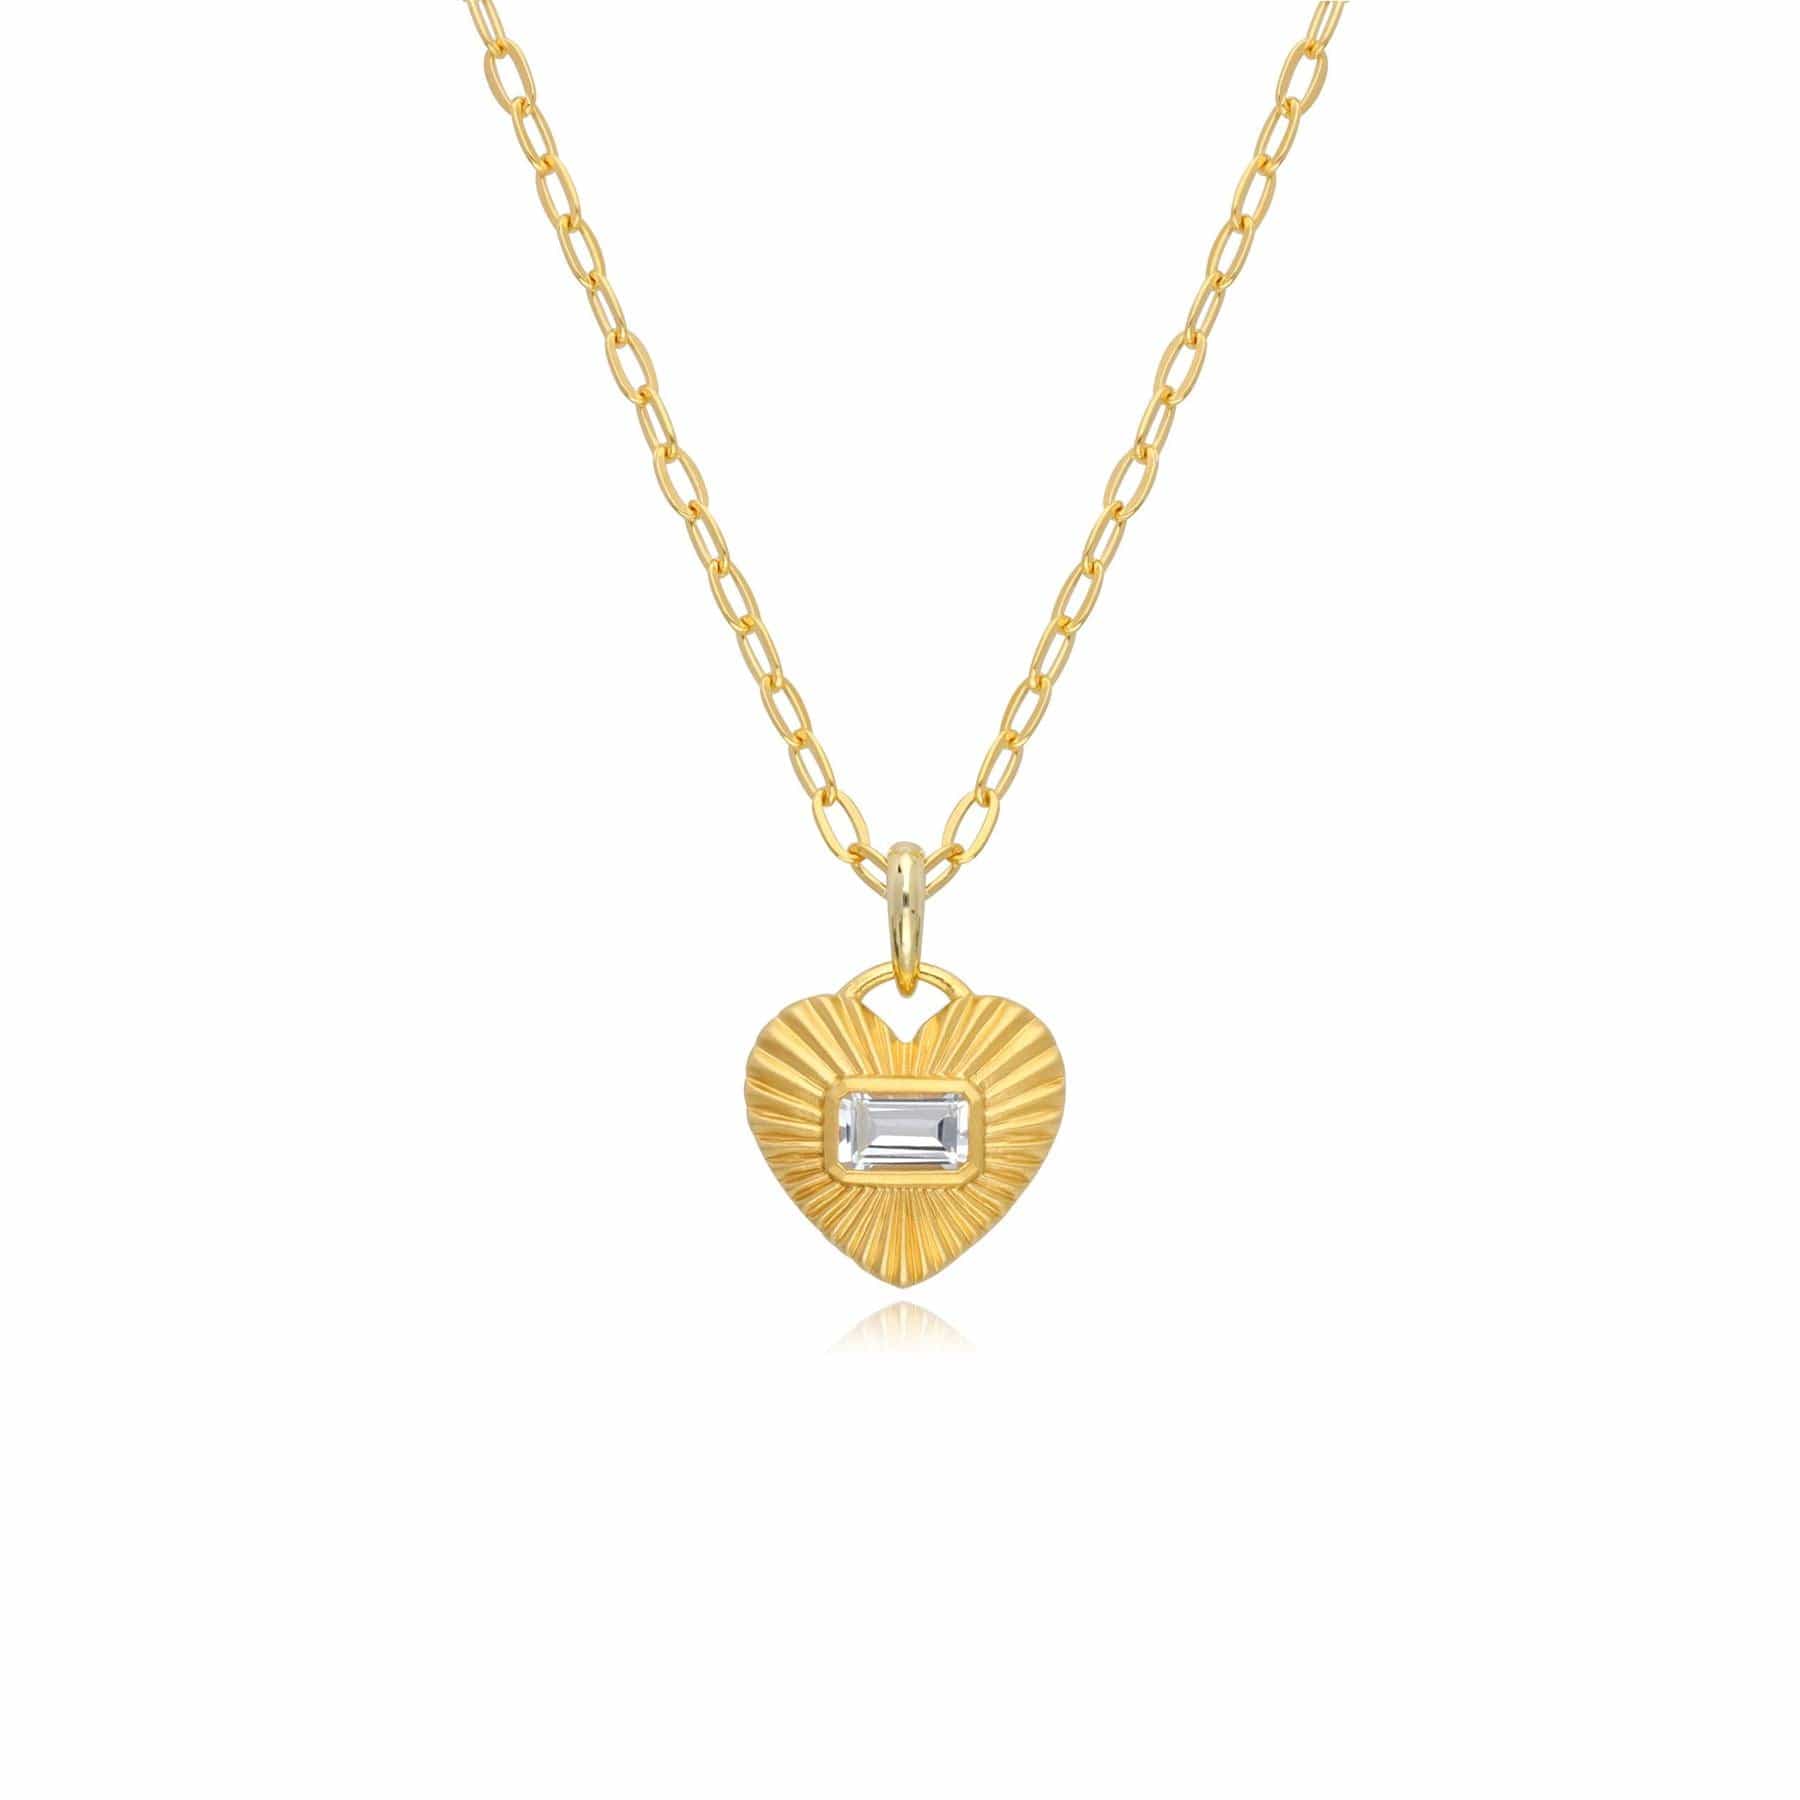 Queen of Hearts White Topaz Necklace